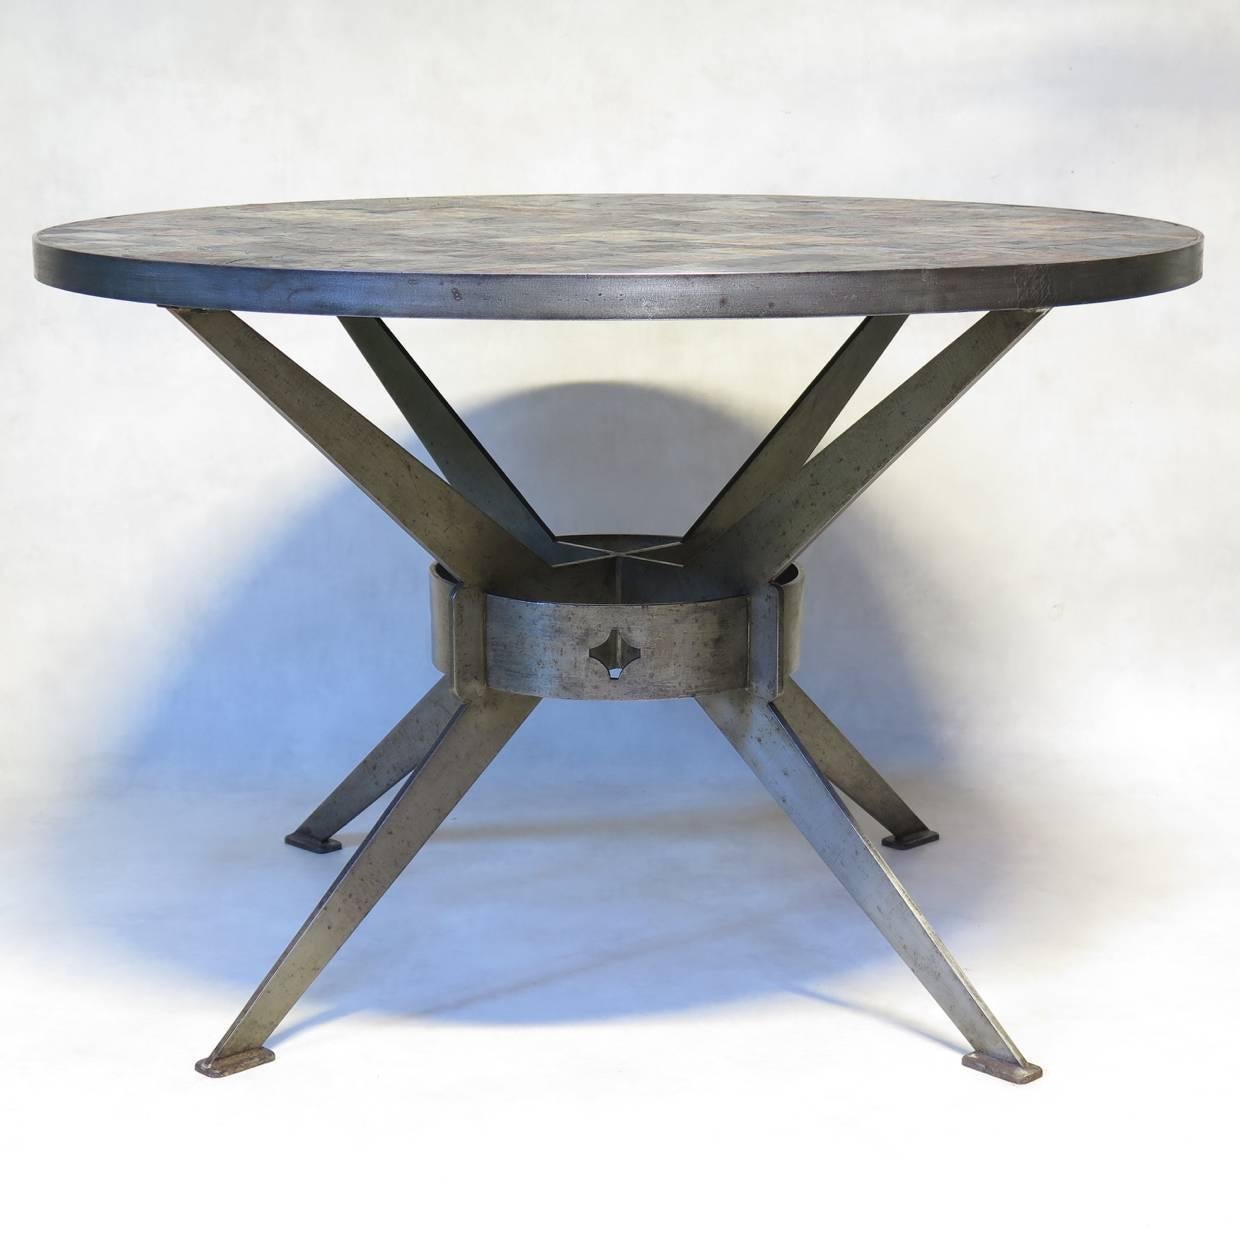 One-of-a-kind round table with a brushed steel base and surround. The top is composed of a mosaic of dark grey and rust-colored slate tiles.